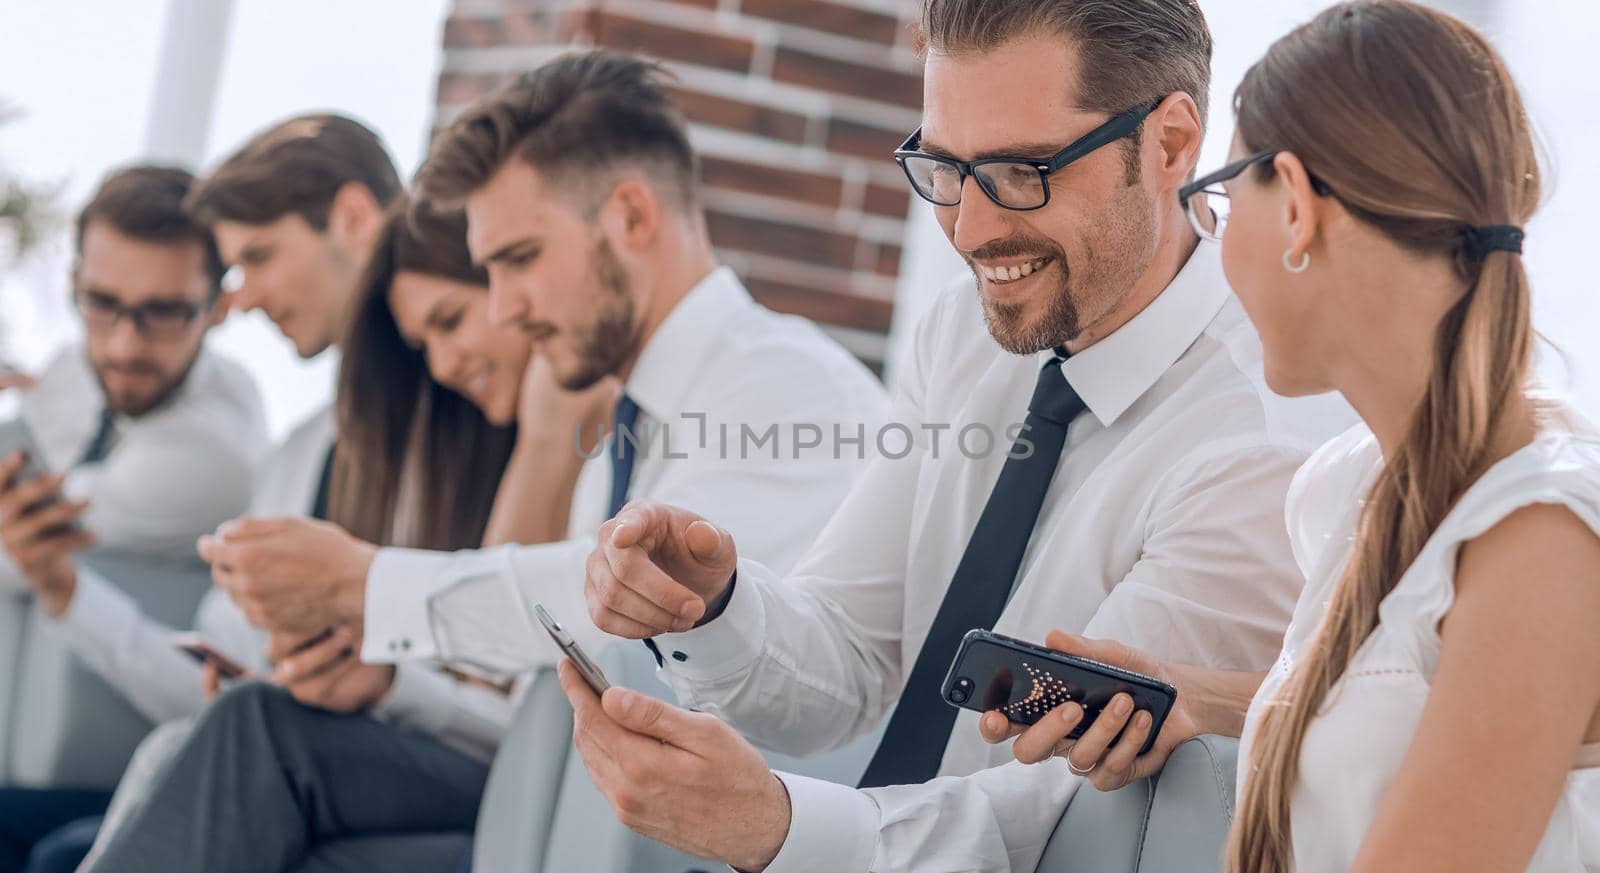 employees of the company using their smartphones sitting in the office lobby by asdf